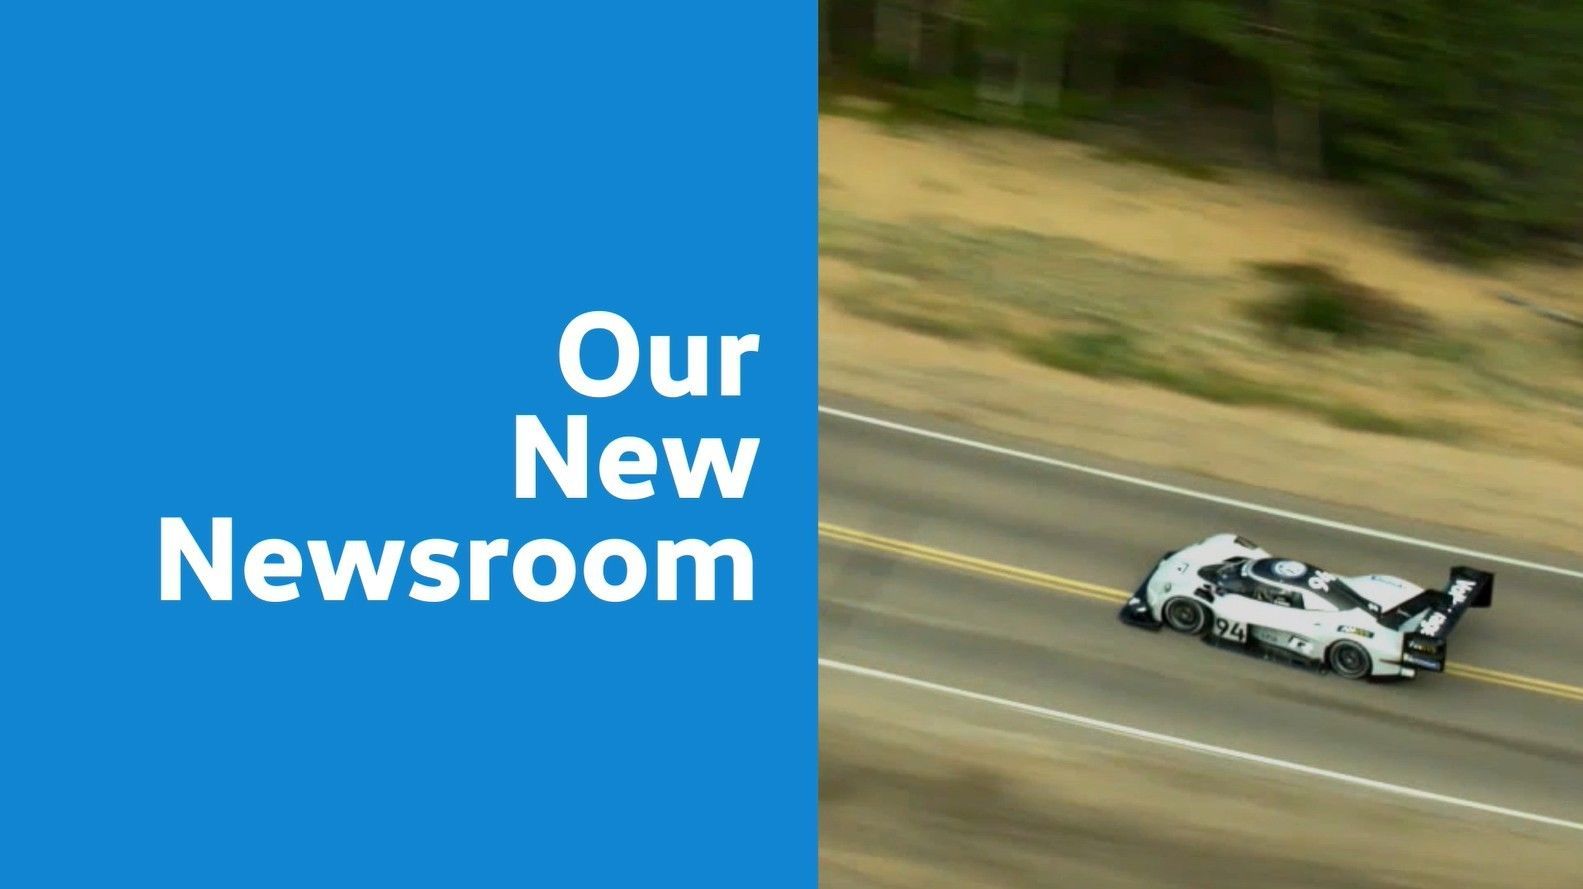 Video - Our New Newsroom